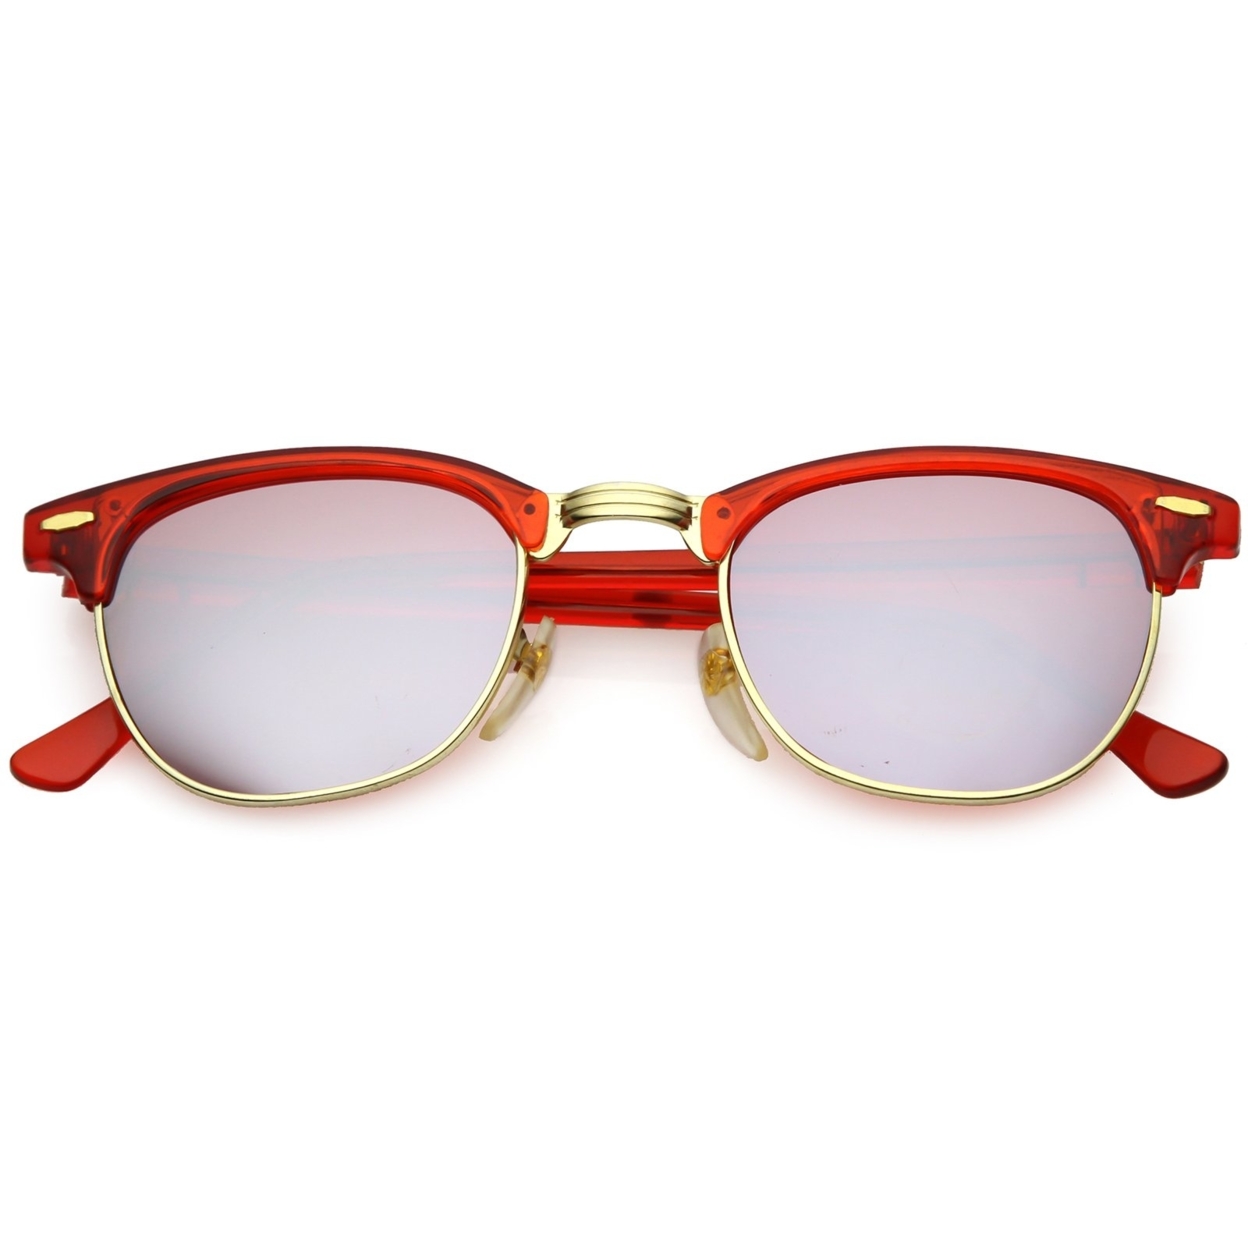 True Vintage Horn Rimmed Semi Rimless Sunglasses Mirrored Square Lens 49mm - Red / Red Mirror